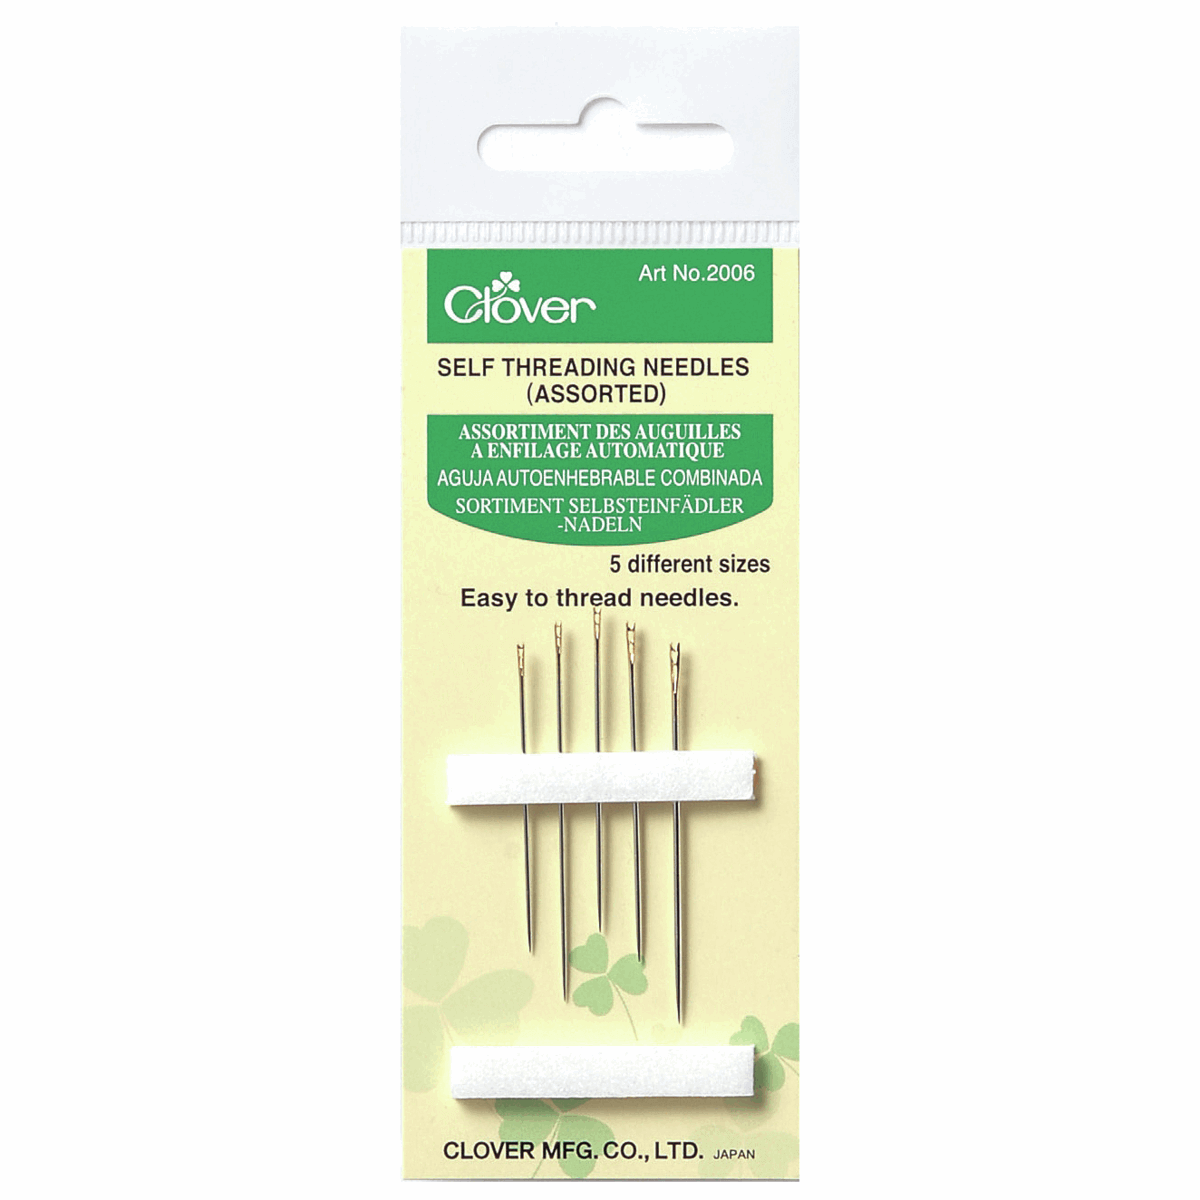 Hand Sewing Needles - Self-Threading - 5 Assorted Sizes